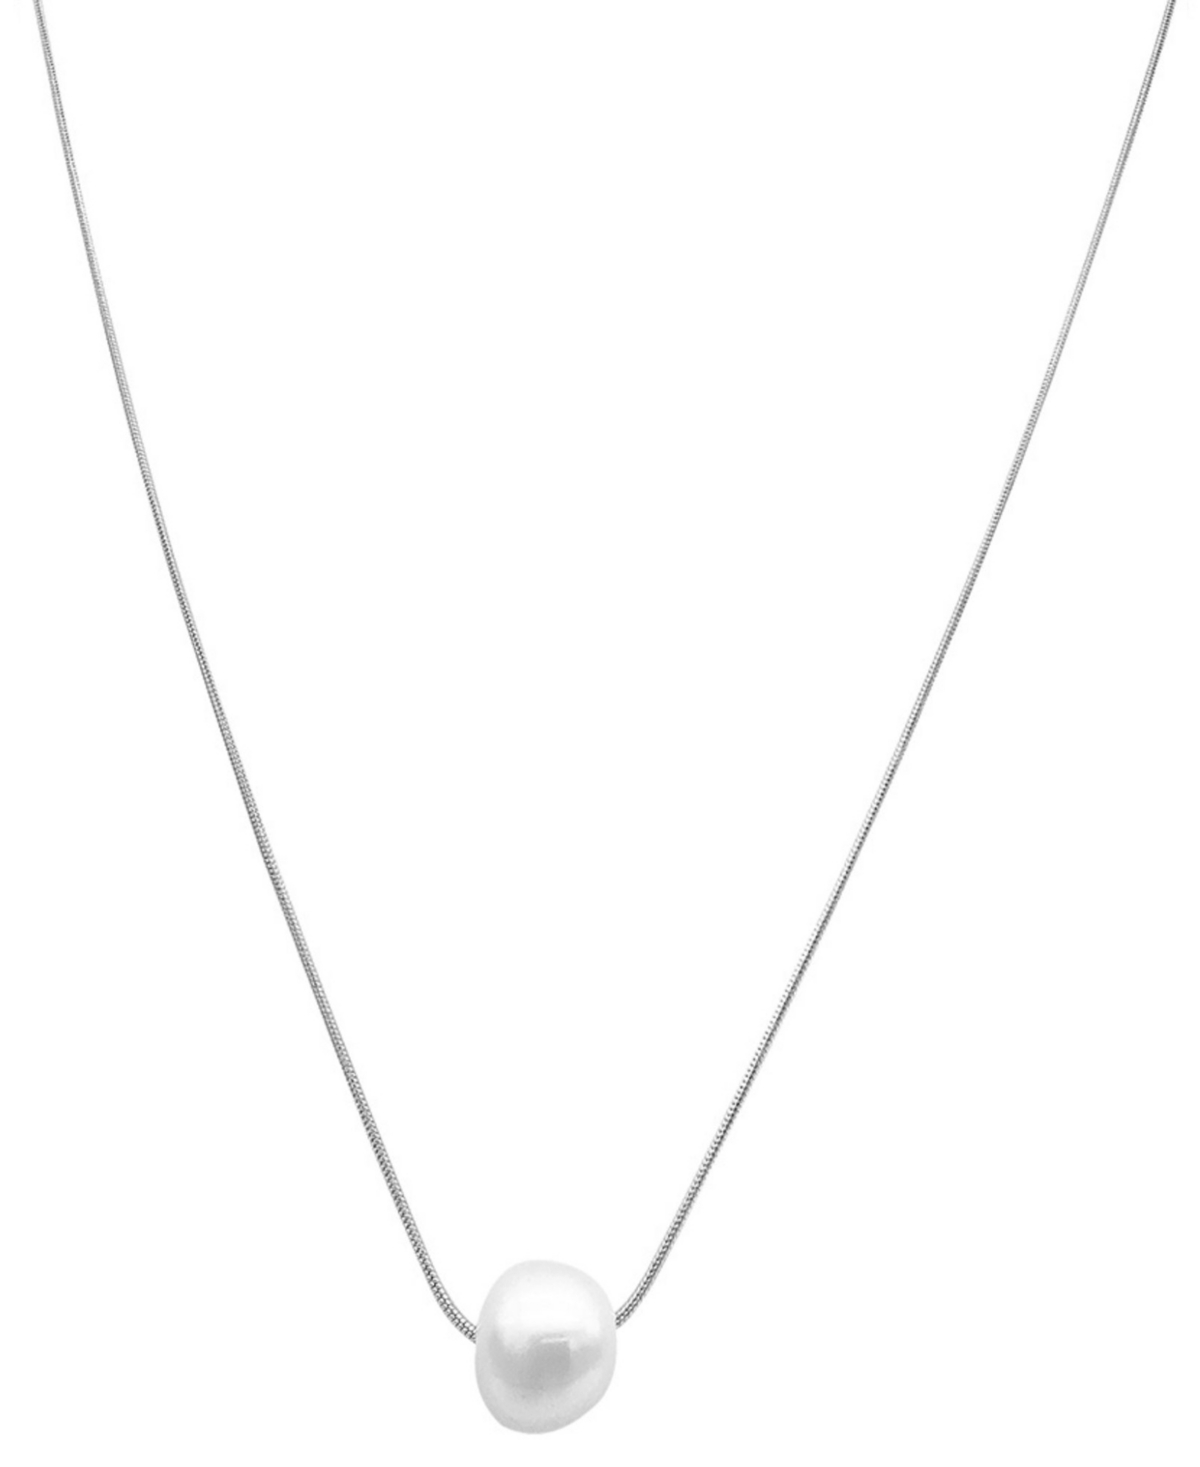 Silver-Tone Freshwater Pearl (10mm) Pendant Necklace, 16" + 2" extender - Silver